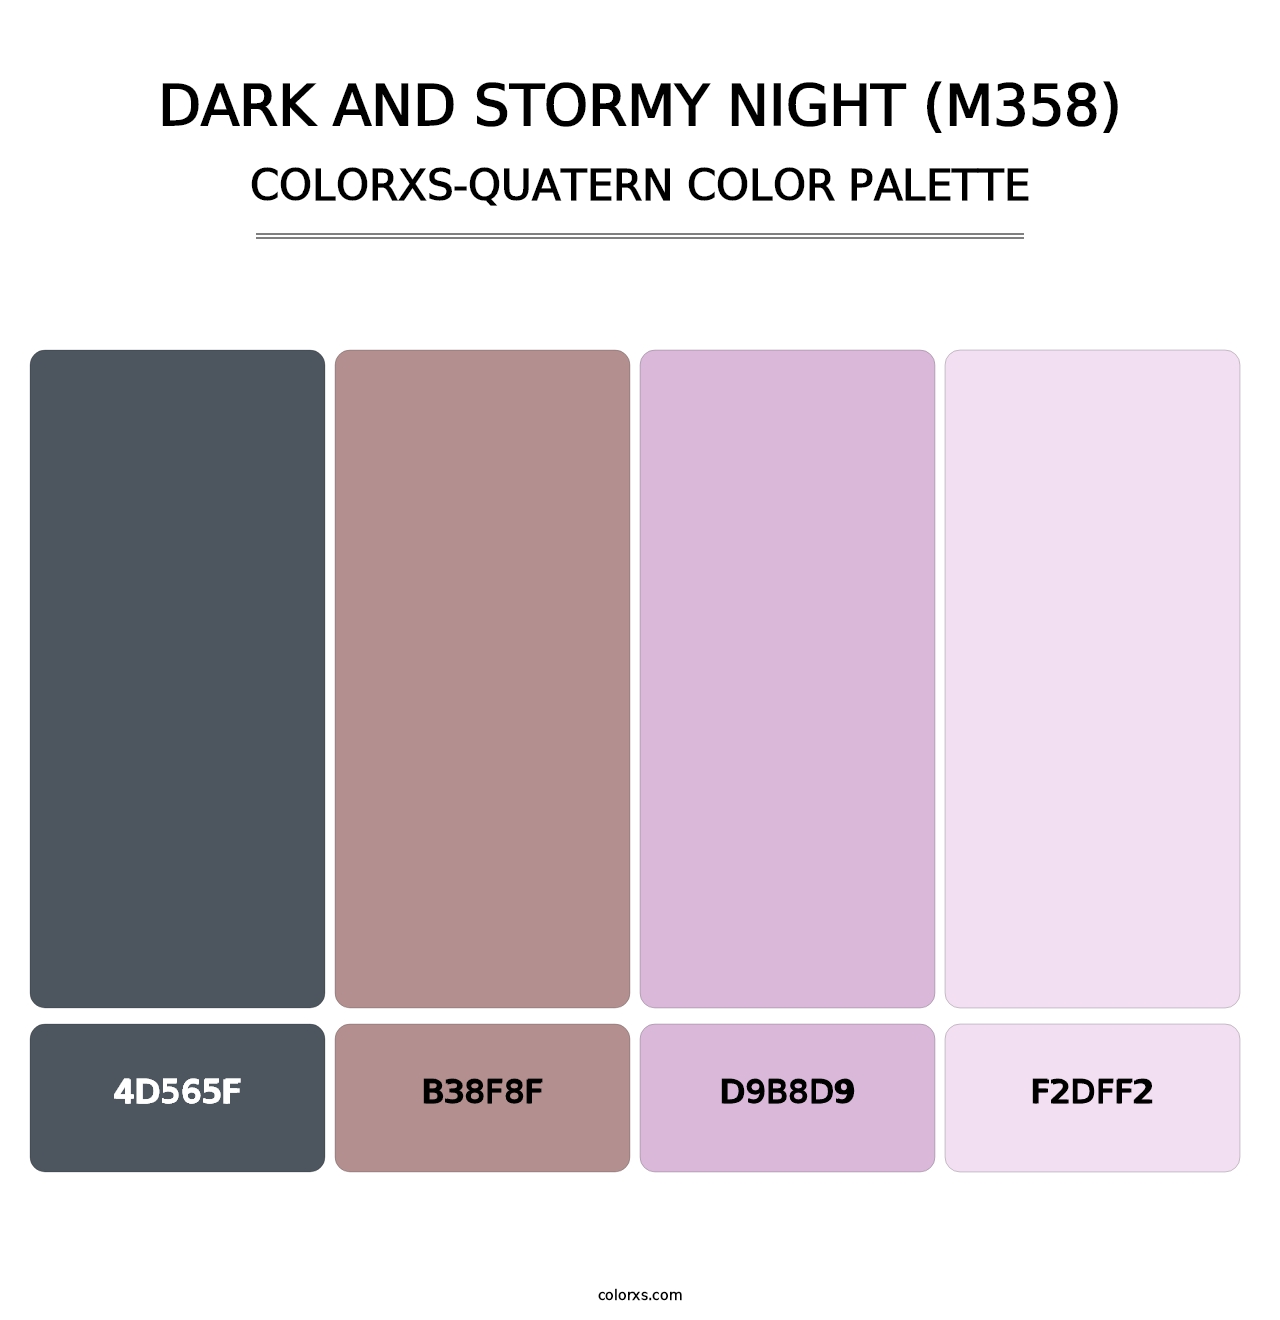 Dark and Stormy Night (M358) - Colorxs Quatern Palette